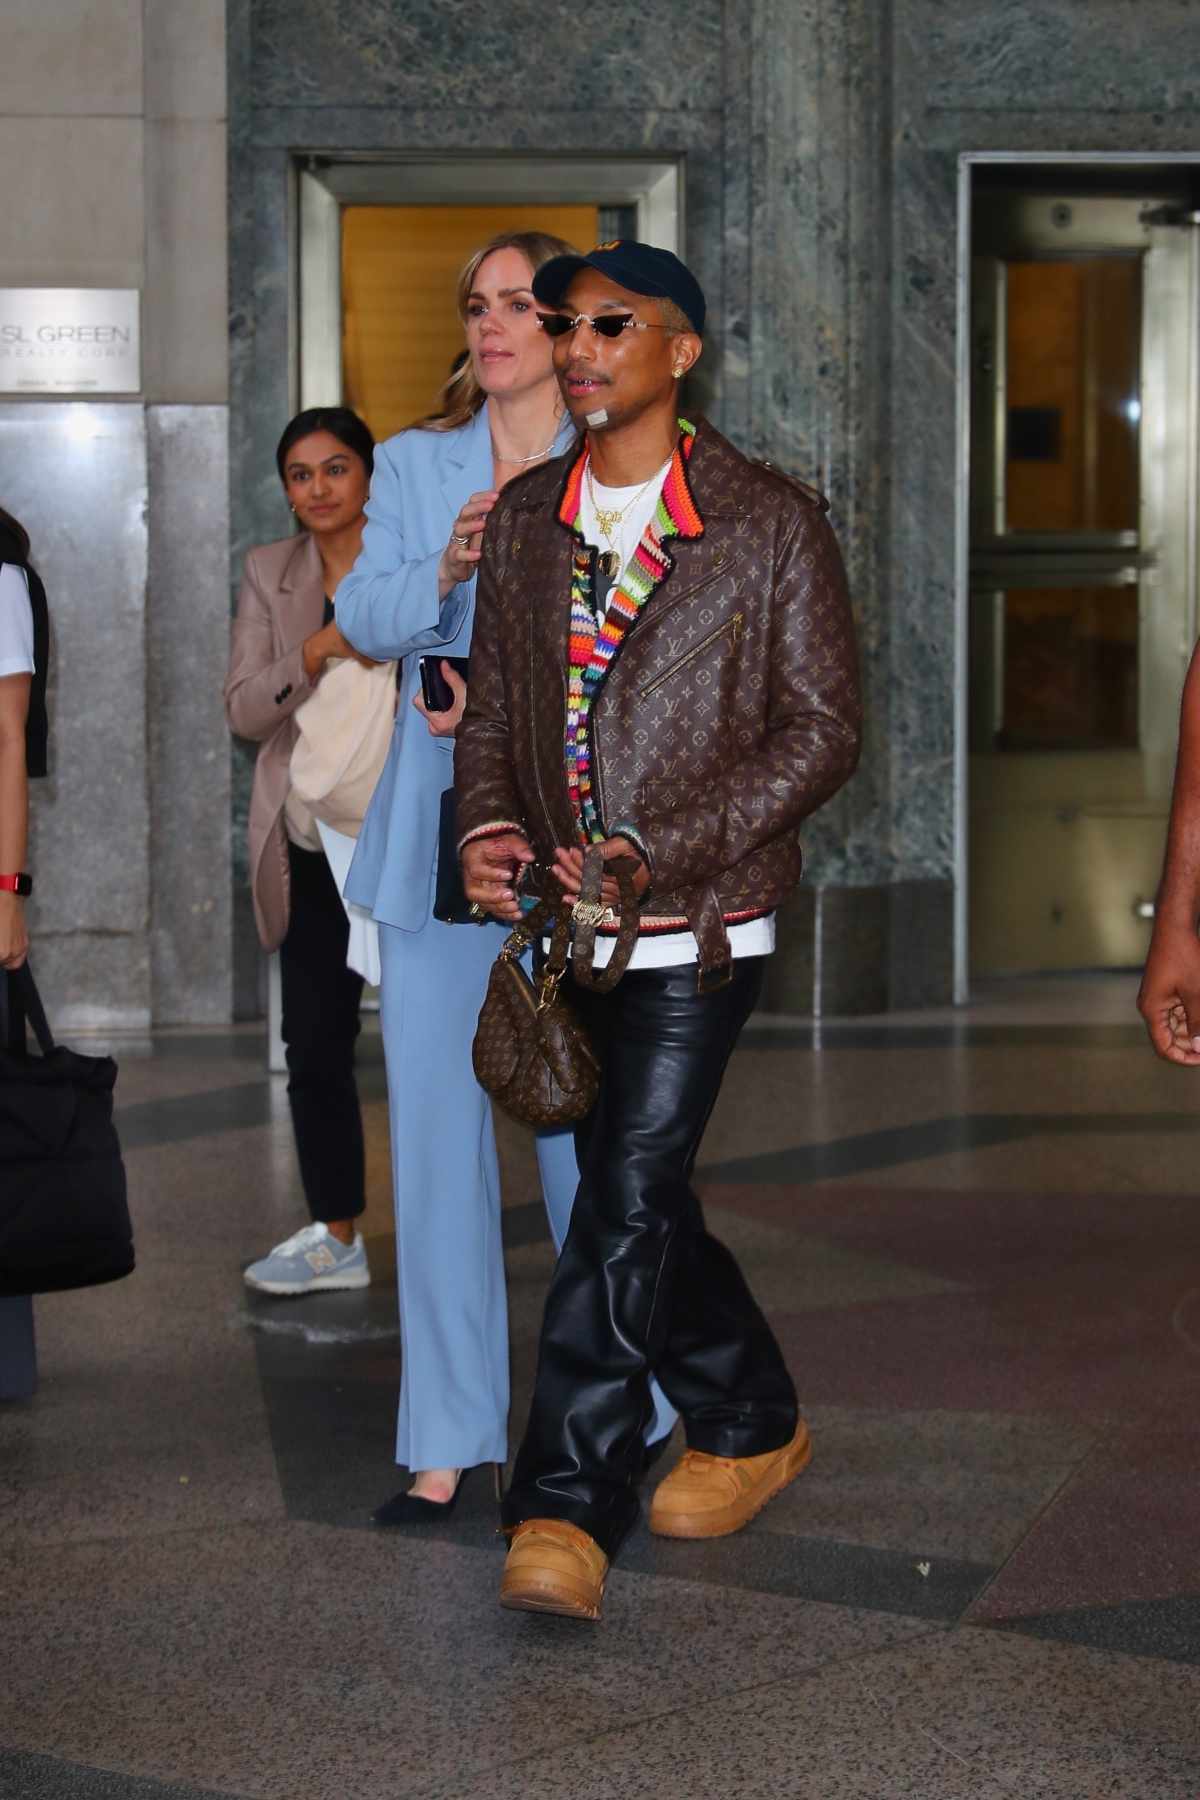 Pharrell's Louis Vuitton dropped, and Big Coat Season will never be the  same again